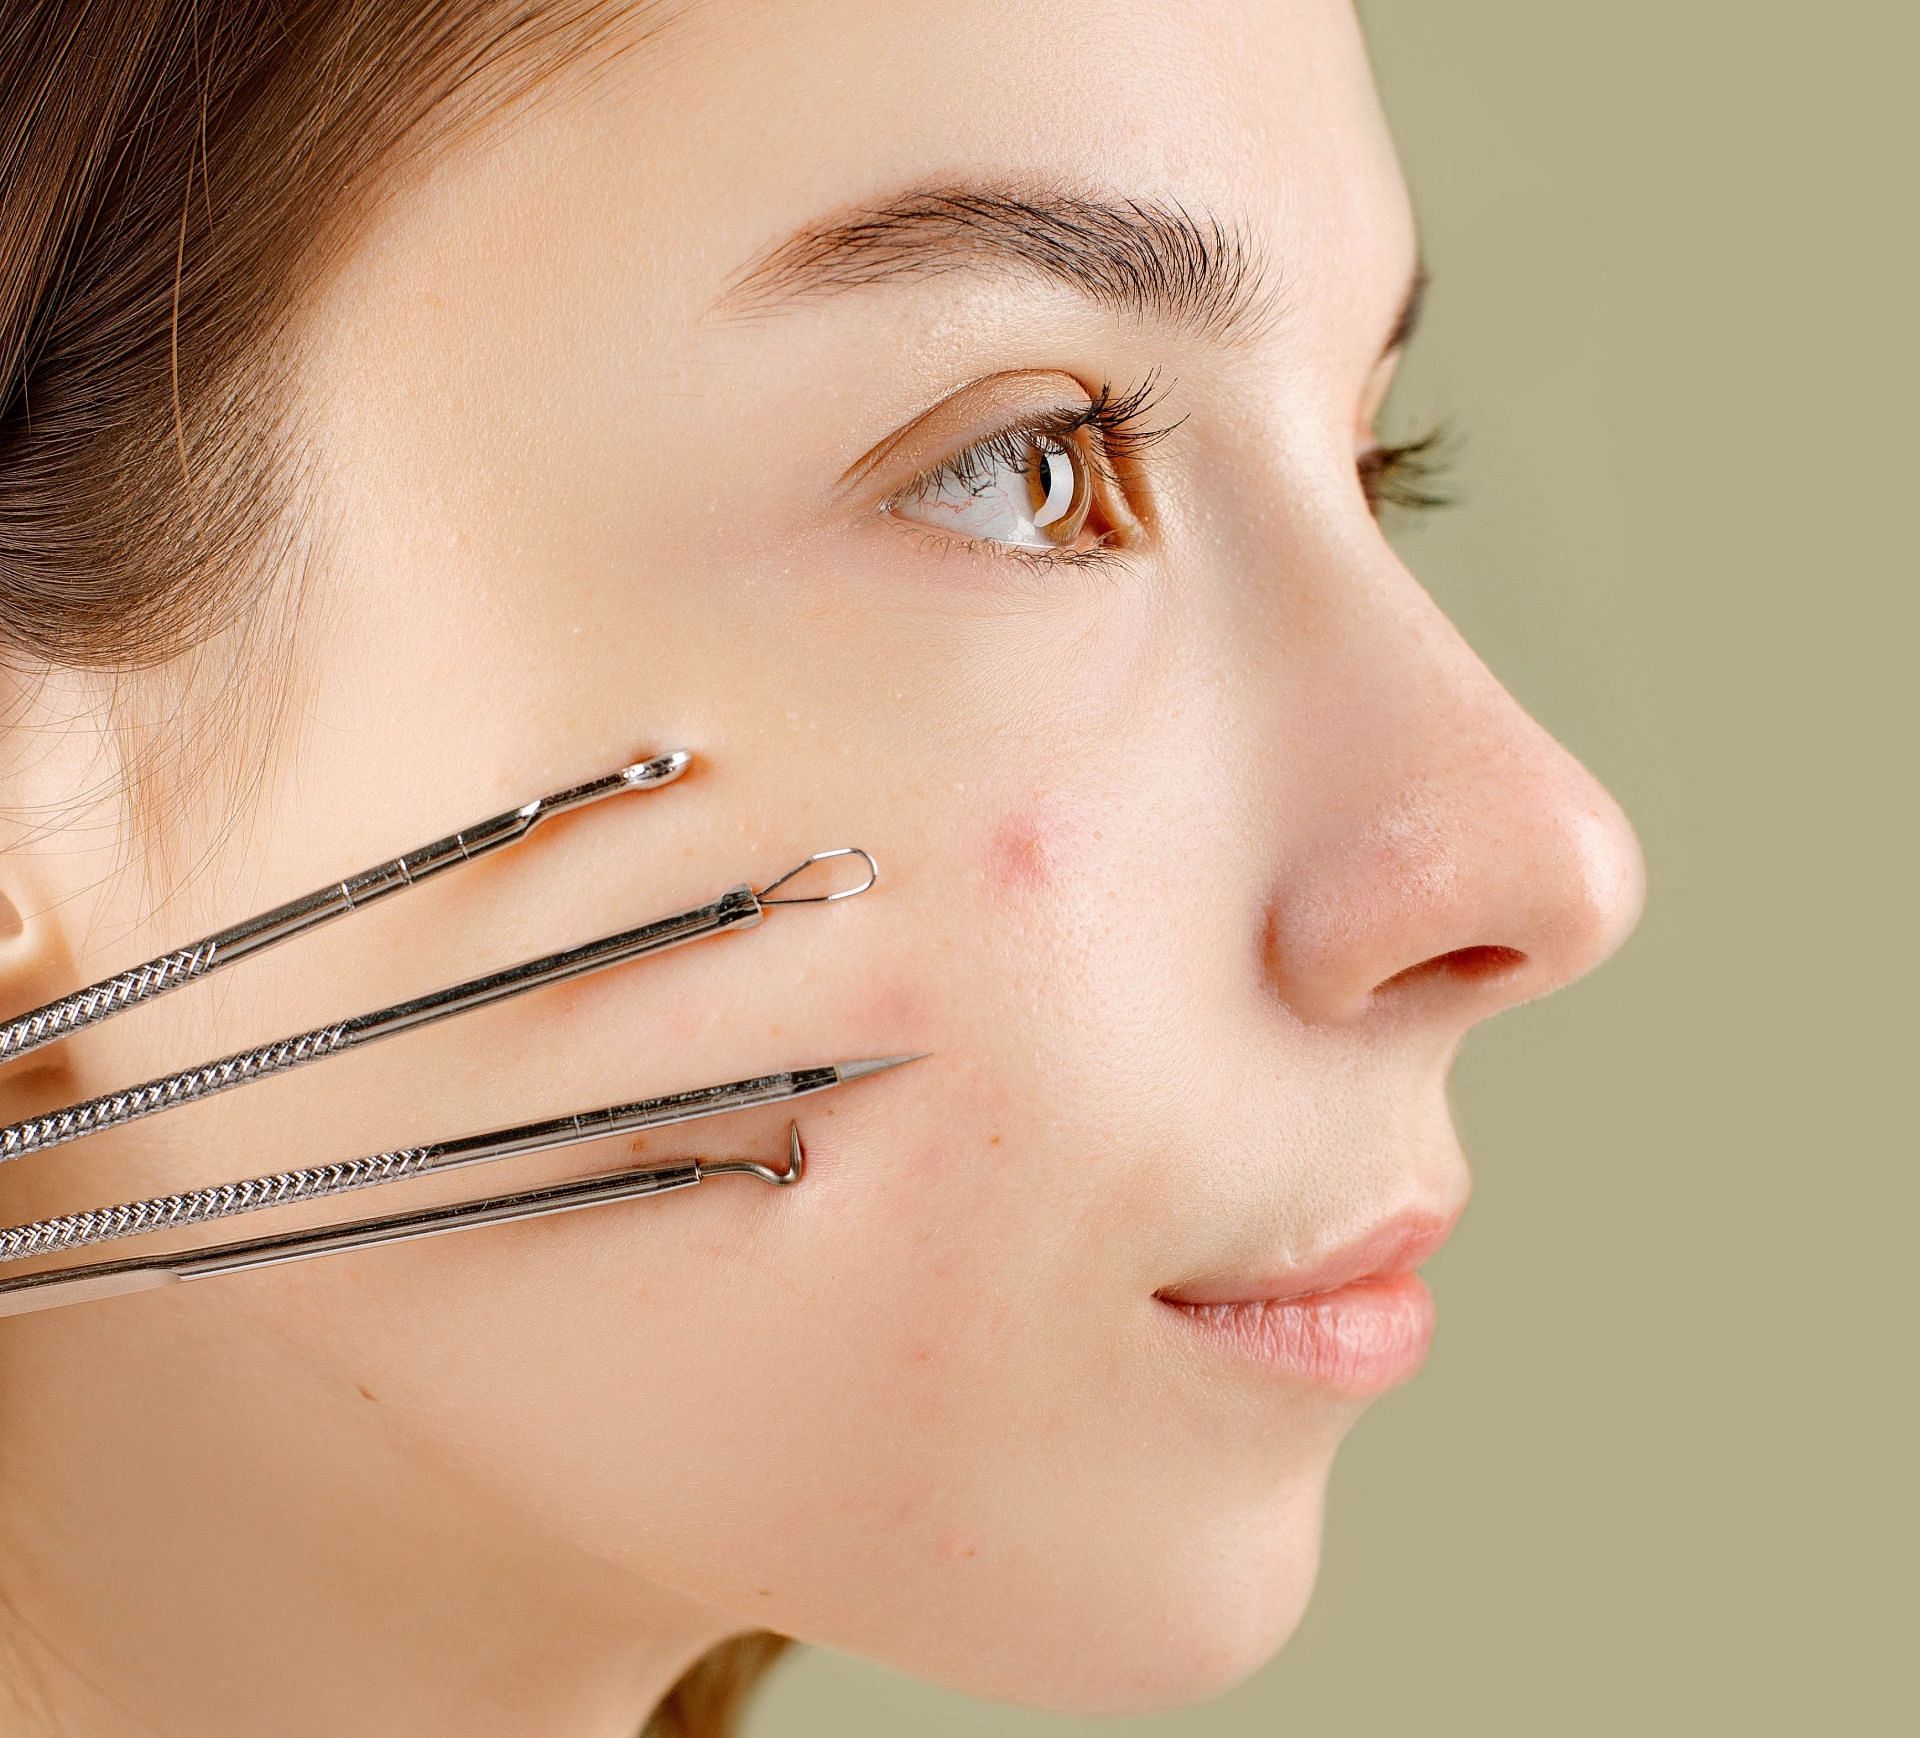 How to deal with acne scarring (Image via Pexels / Anna Nekrashevich)